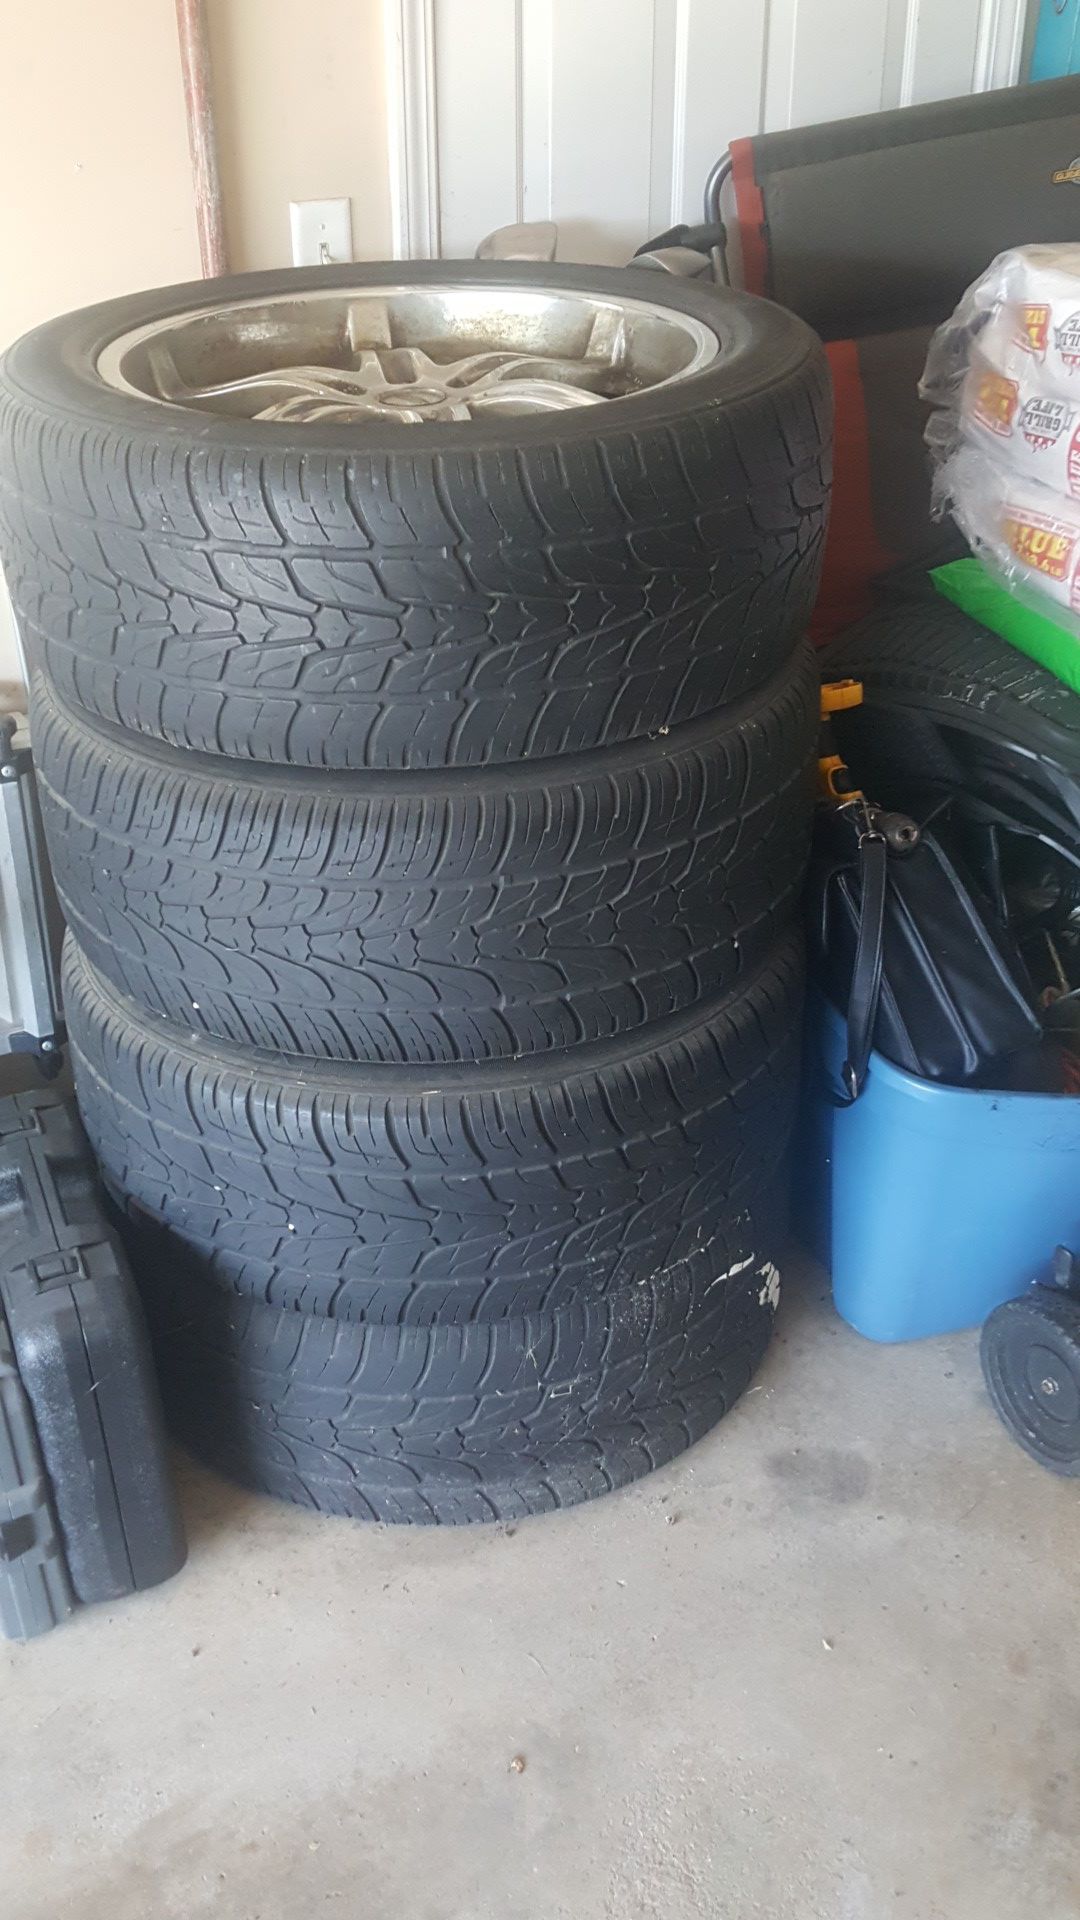 305/45/22 Good condition rims and tires. Chevy truck bolt pattern. They came off of a Chevy Avalanche.